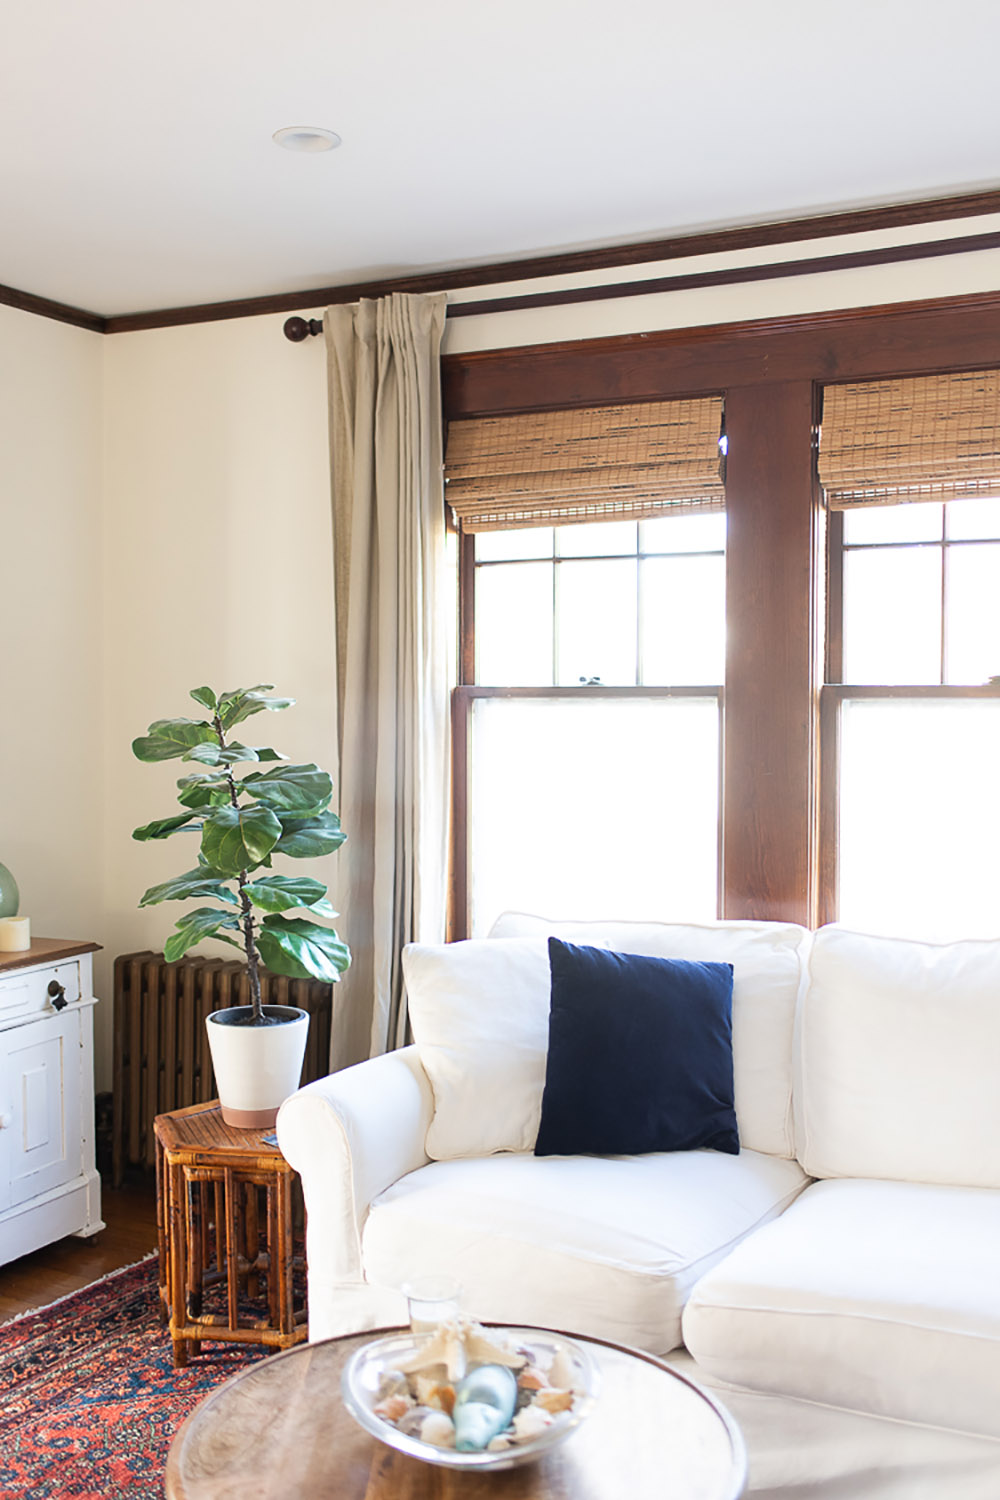 A white couch with a navy pillow sits in front of a window with woven roman shades.